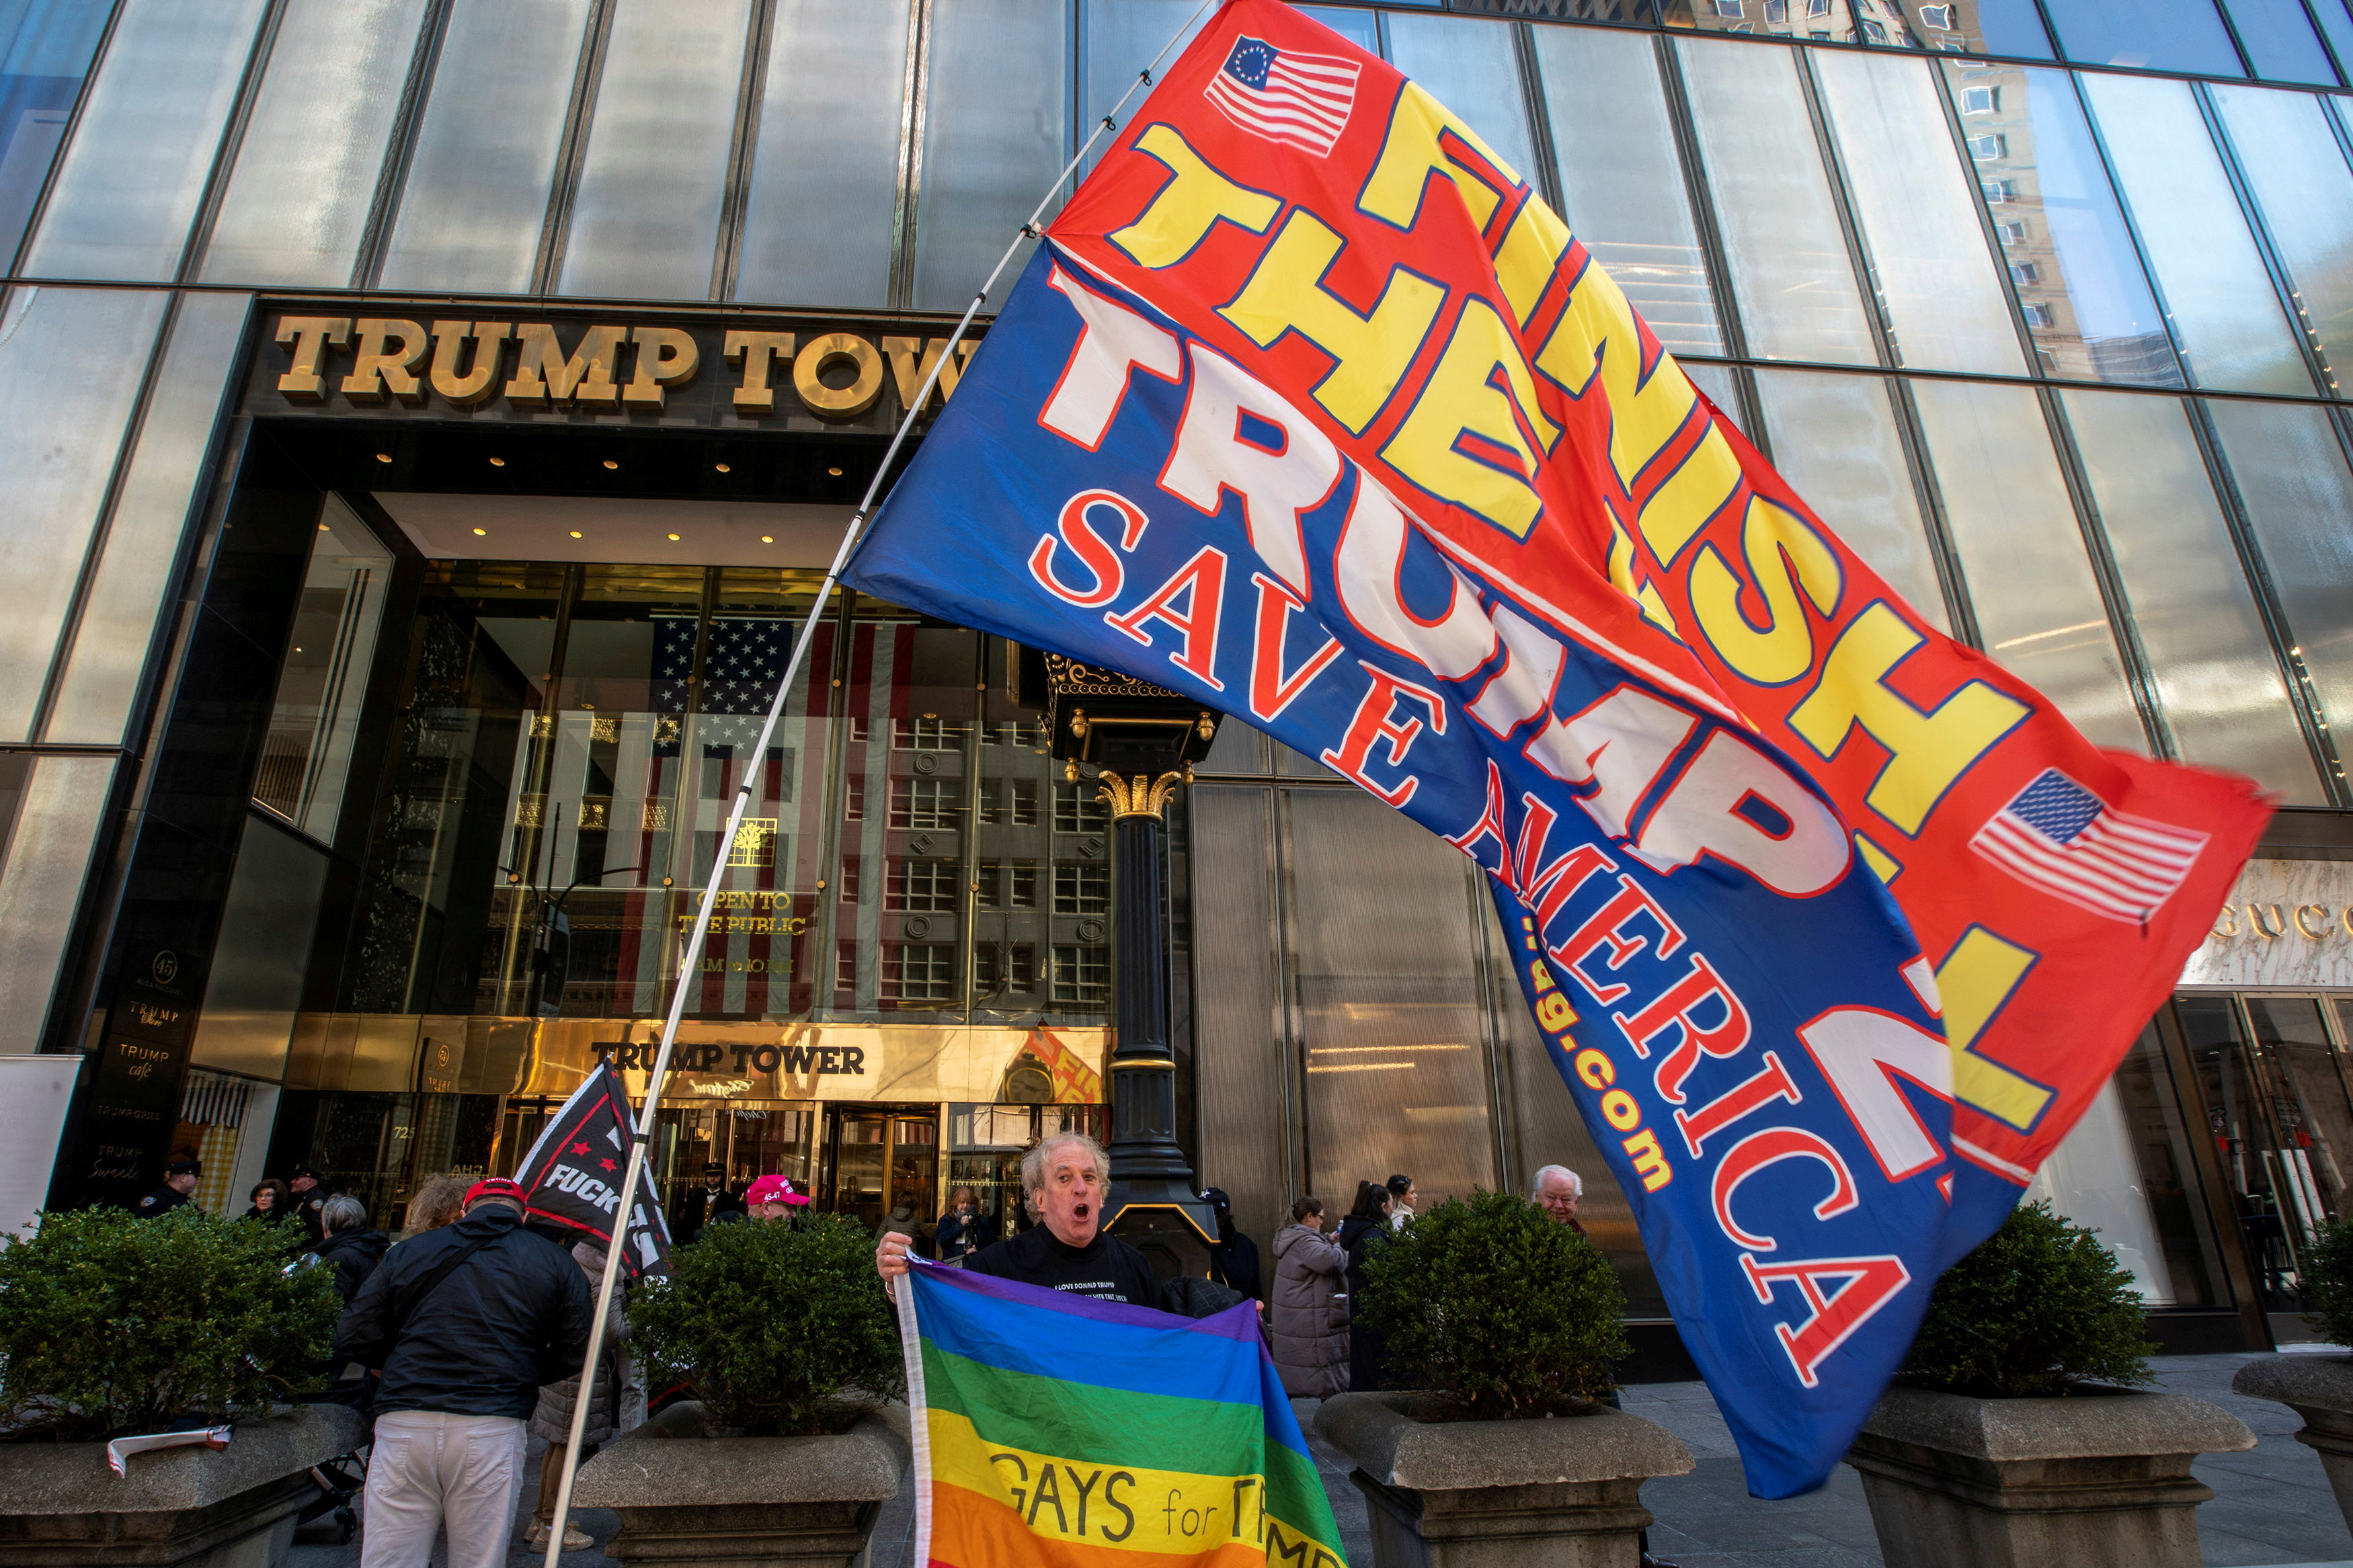 Supporters of former U.S. President Trump gather at Trump Tower in New York